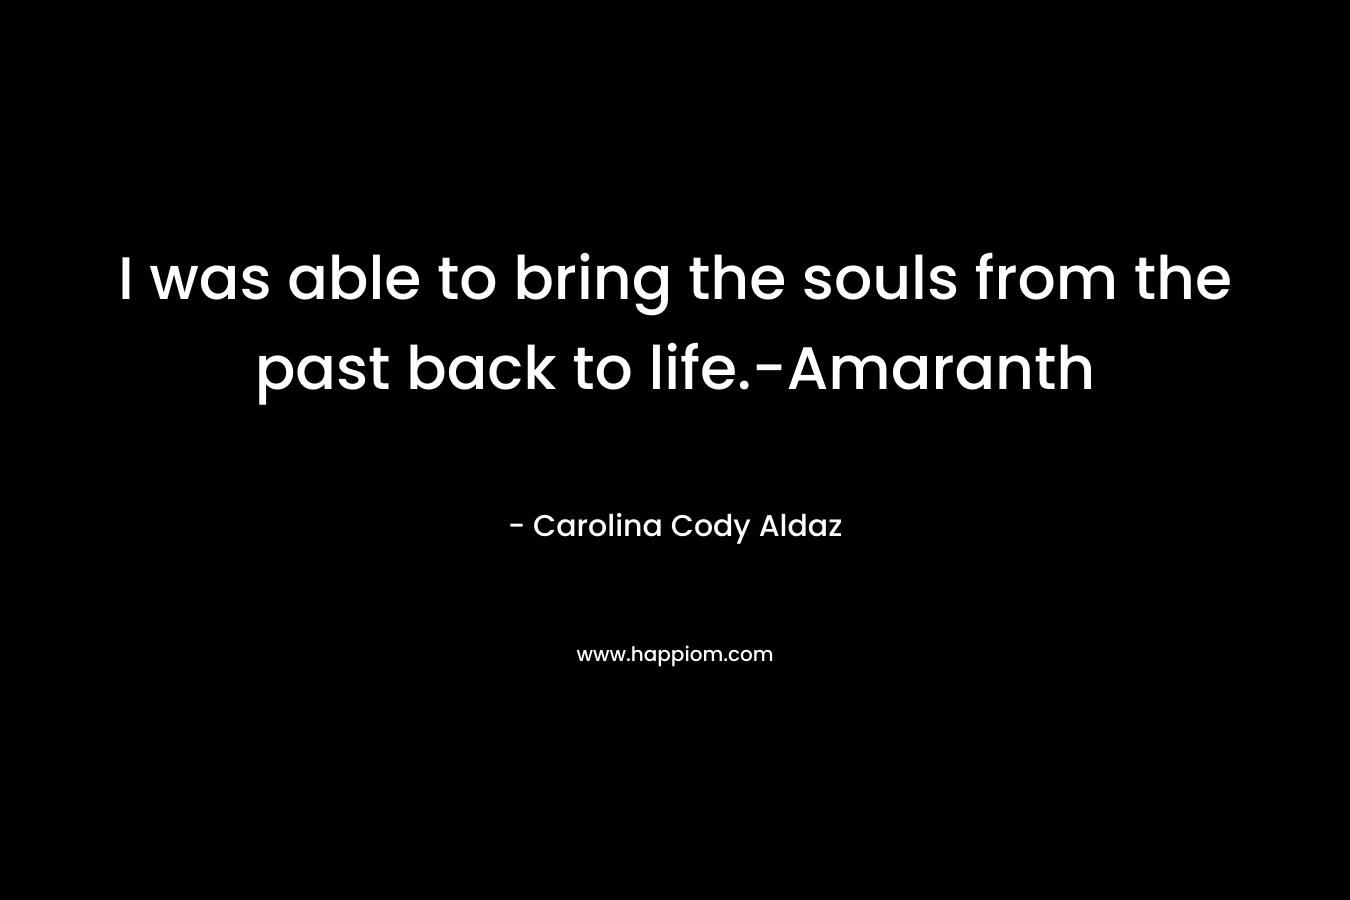 I was able to bring the souls from the past back to life.-Amaranth